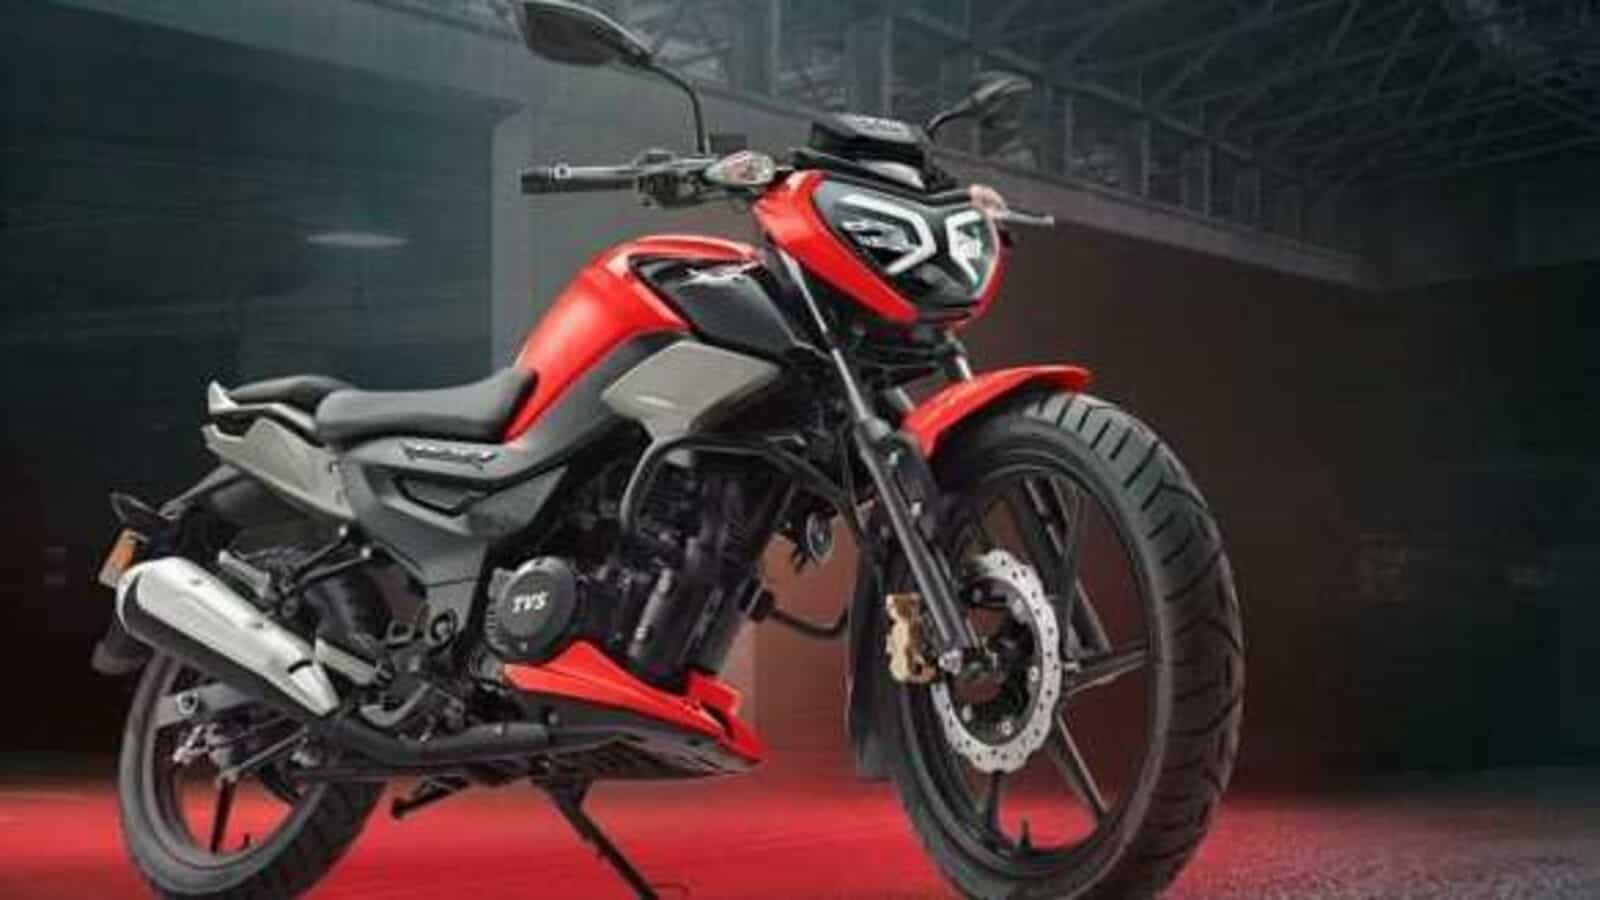 TVS launches a new motorcycle to strengthen its 125cc segment. Details here